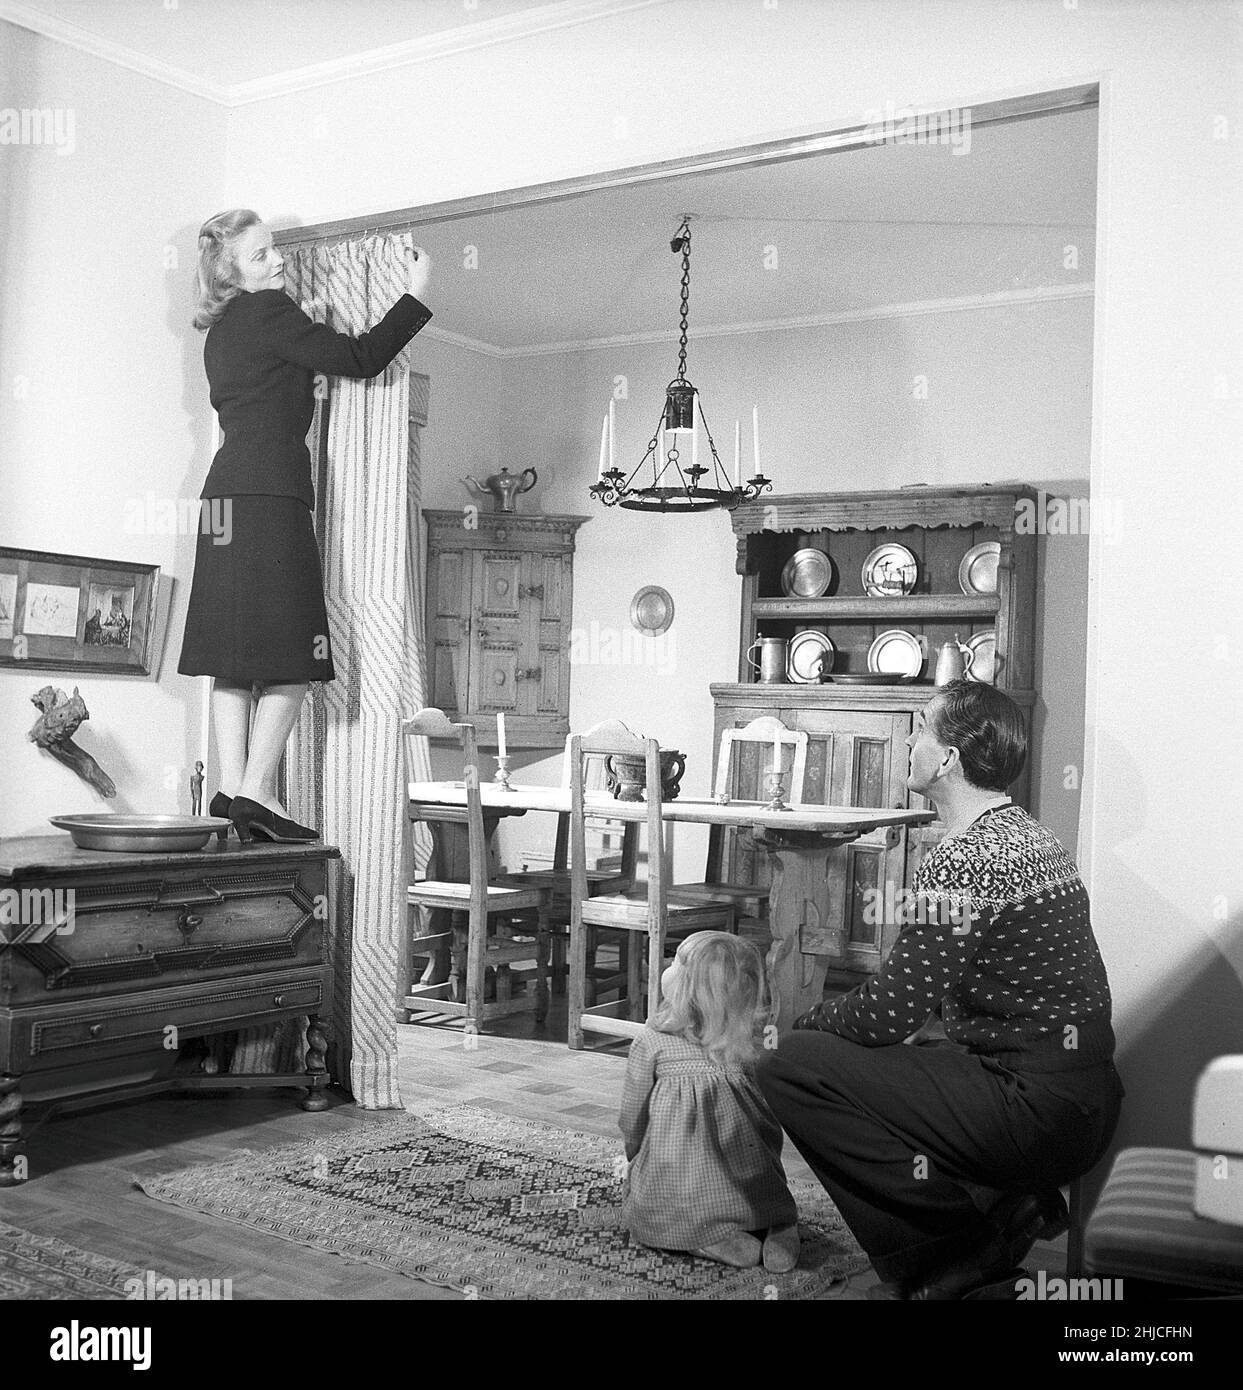 In the 1940s. A young couple arranges the drapes that divides the rooms in their apartment. Mrs Vibeke Falk stands on a piece of furniture to reach the clips and adjust the drapes while Mr Lauritz Falk and their daughter looks on. The back room has a rustic nordic interior with traditional wooden furniture with historic background. Sweden 1946 Kristoffersson ref Y38-4 Stock Photo